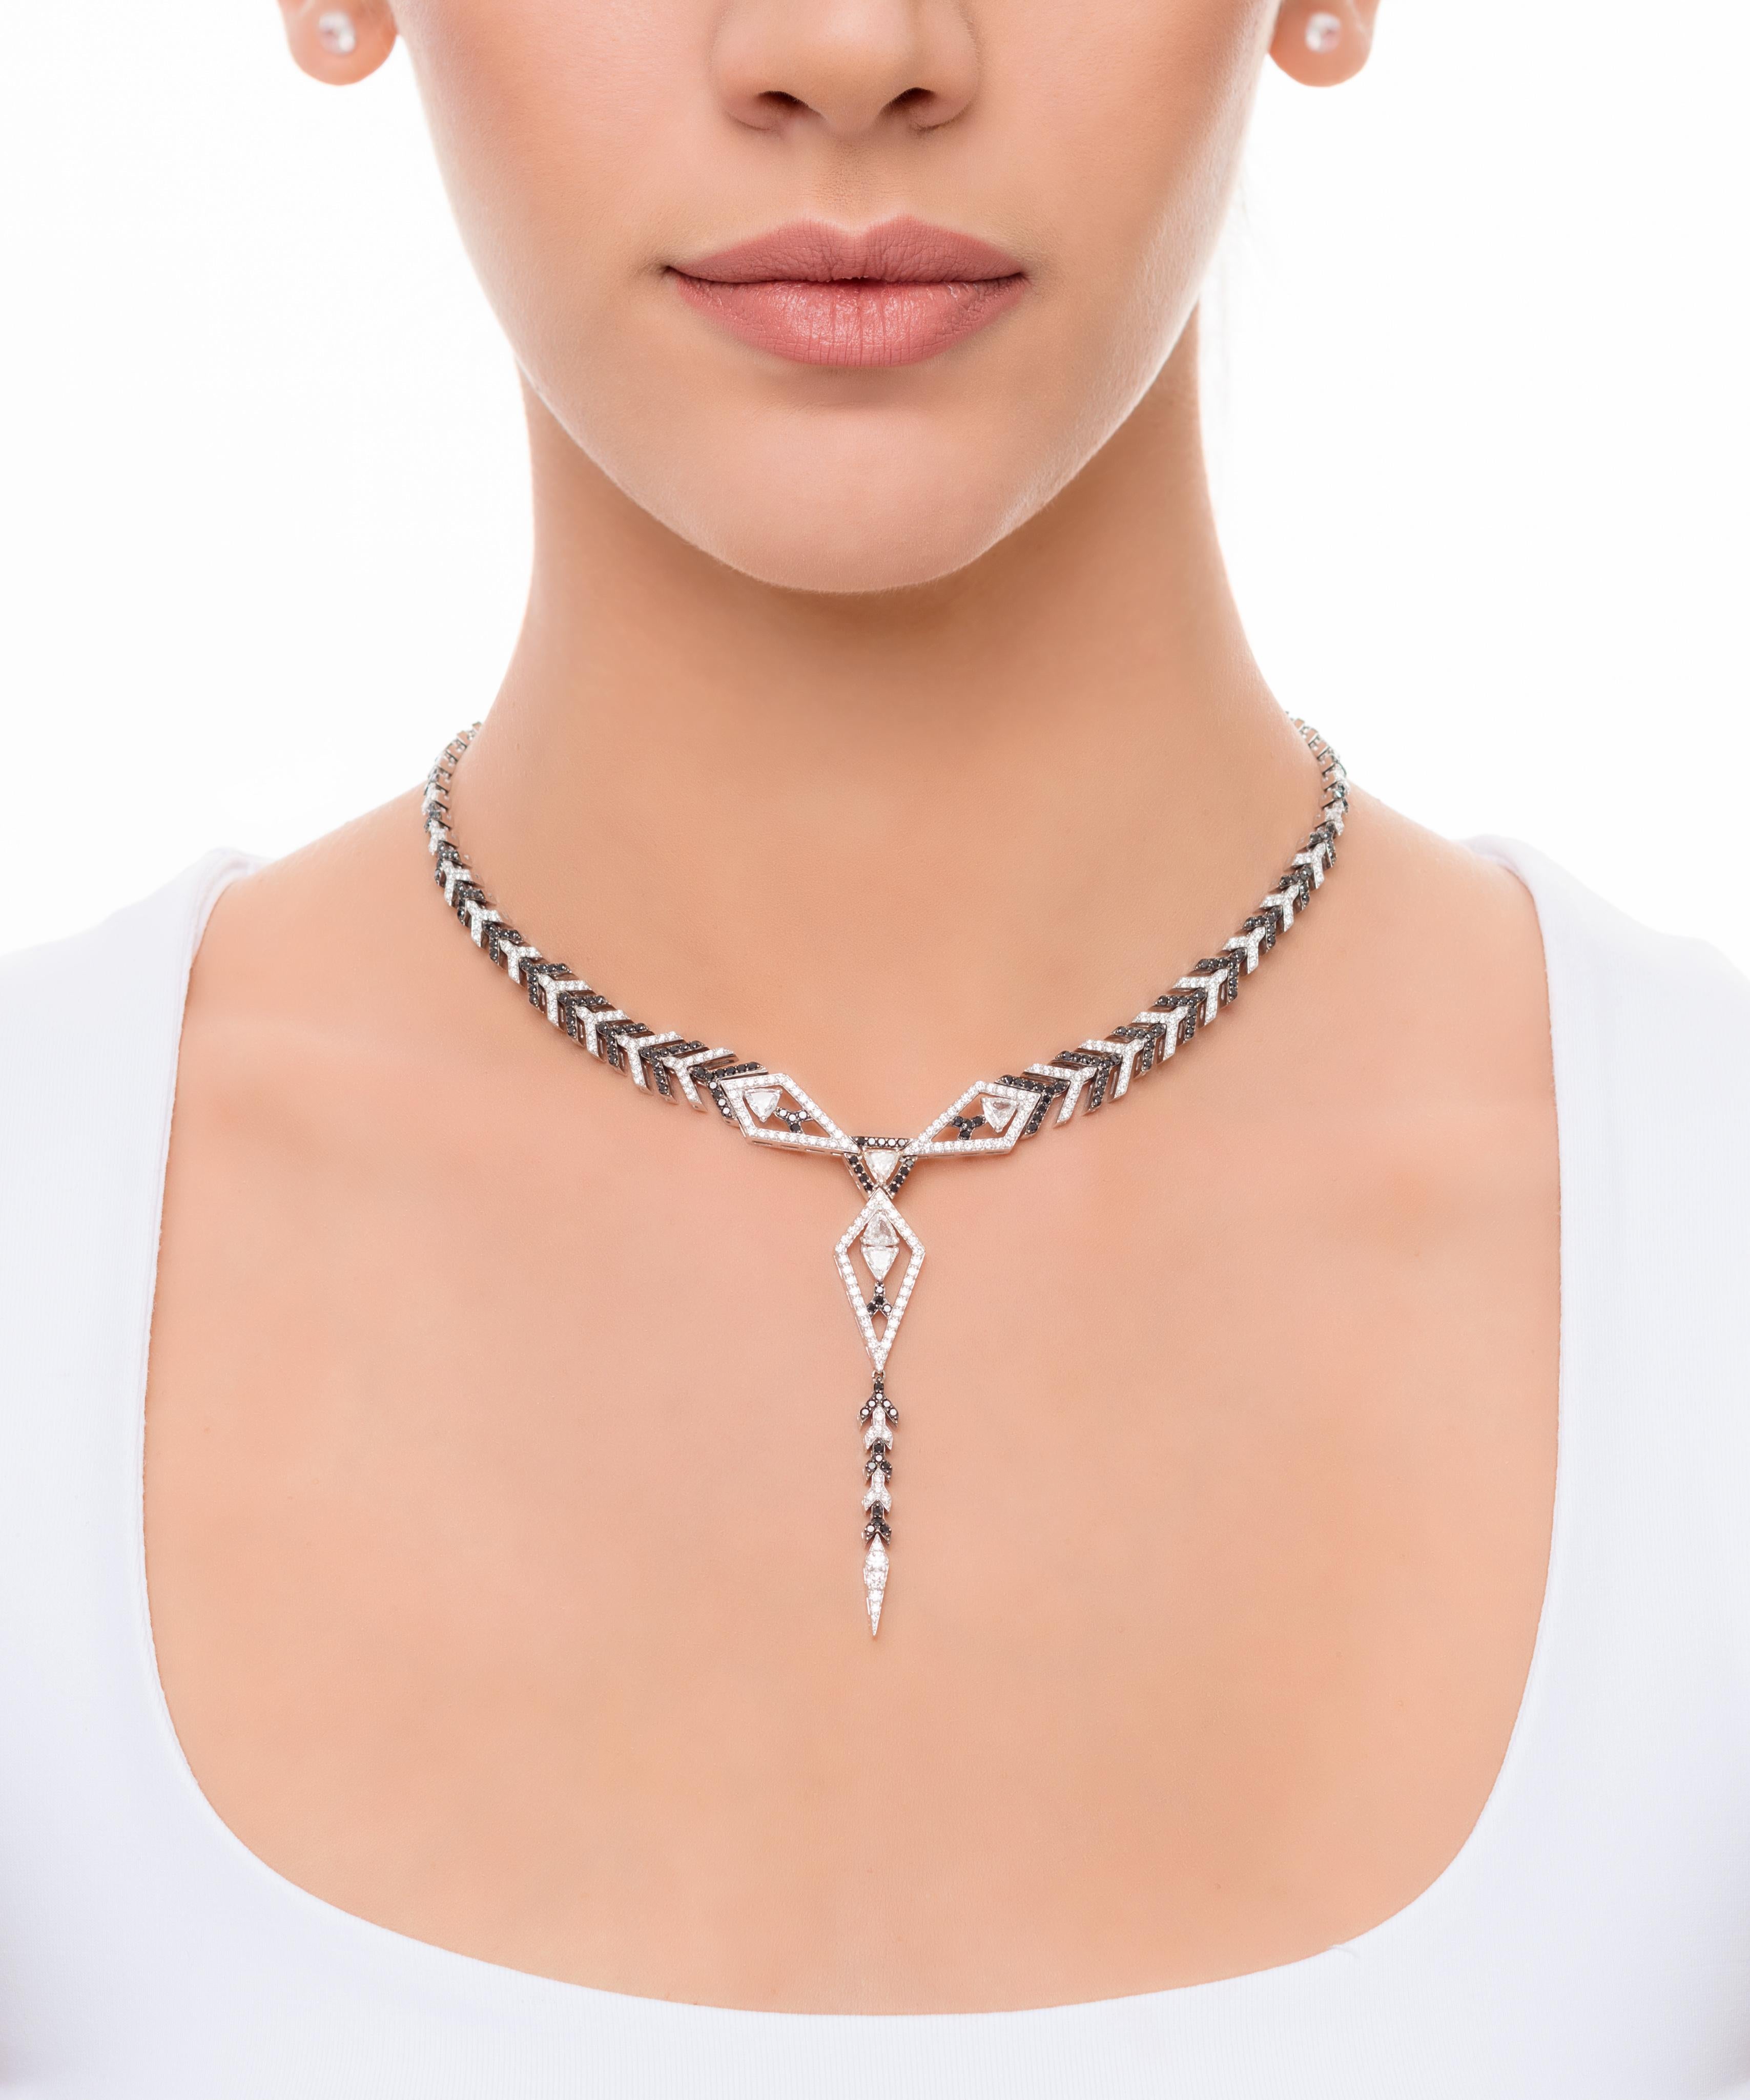 Women's 18K White Gold & 4.66 cts Black 5.56 cts White Diamonds Arrow Necklace by Alessa